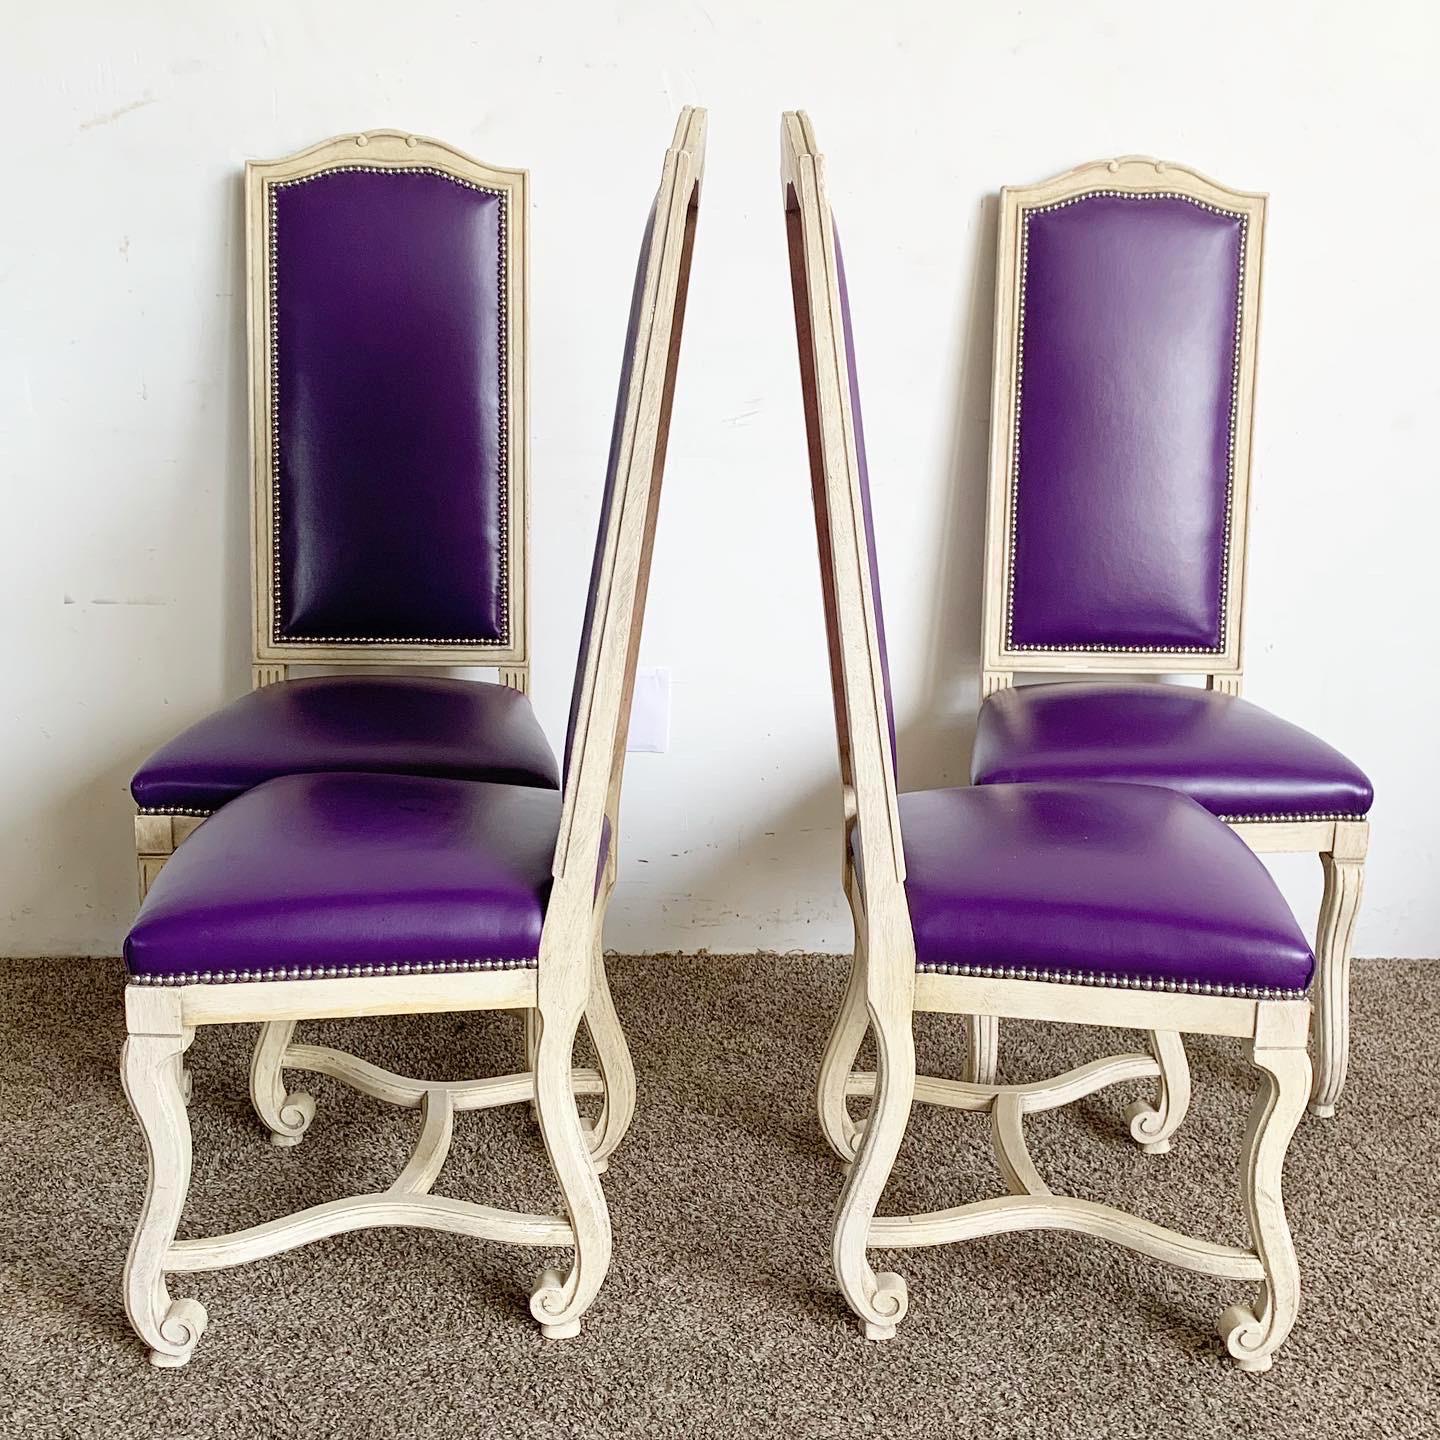 French Provincial Purple Vinyl and Platted Back Dining Chairs - Set of 4 For Sale 1